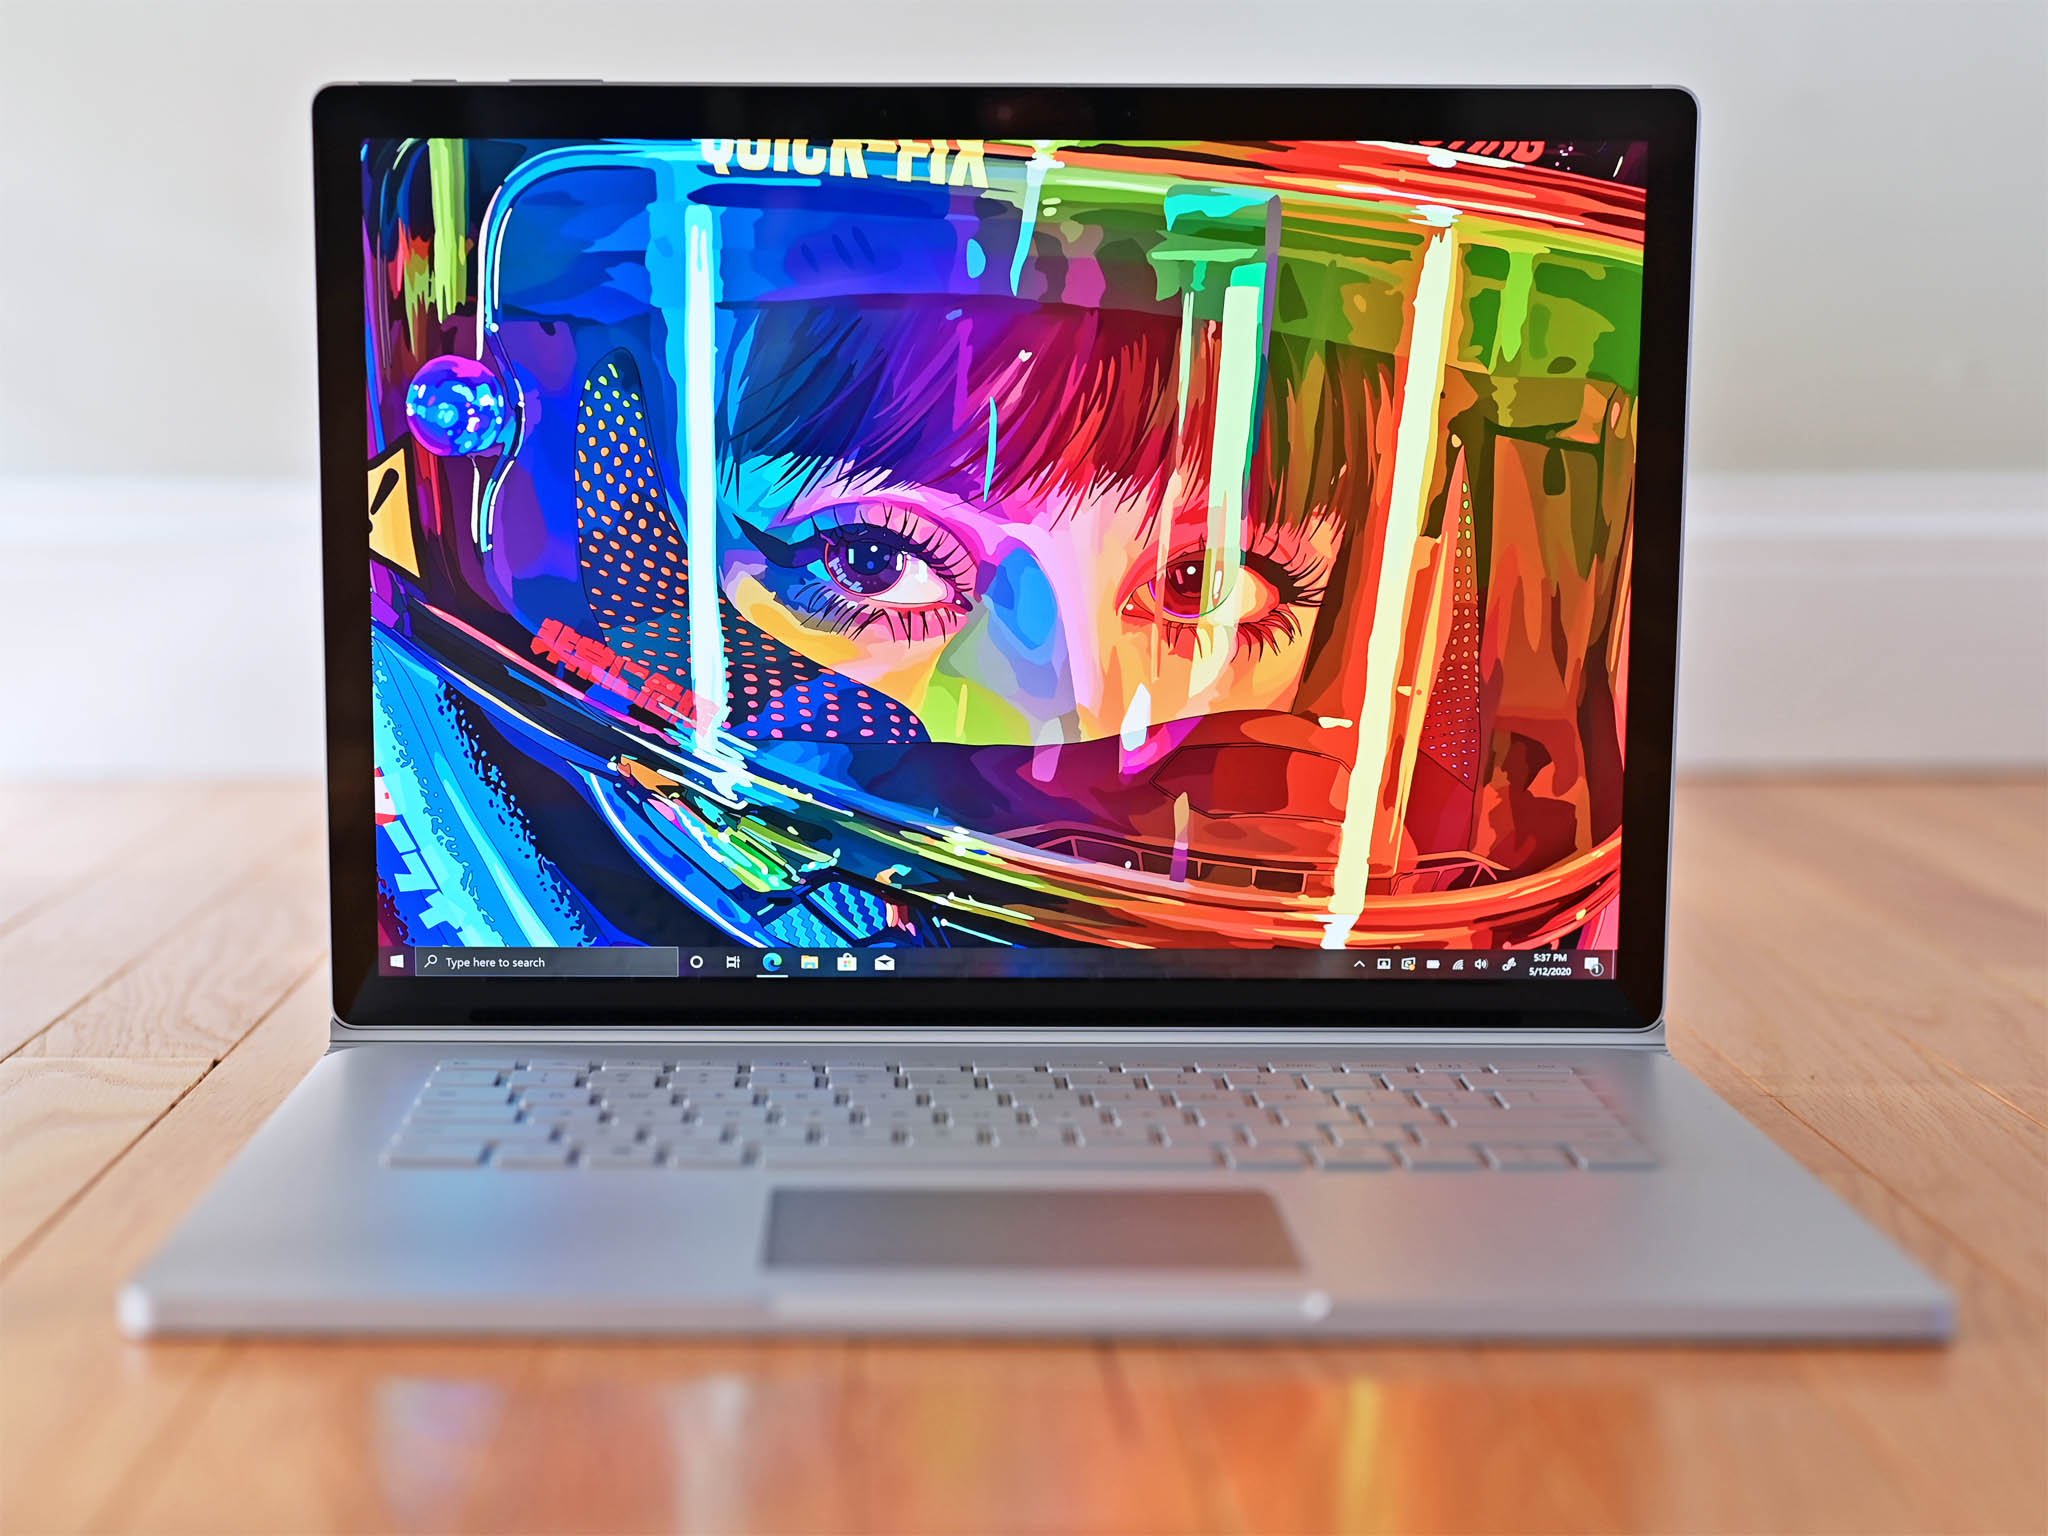 https://www.windowscentral.com/sites/wpcentral.com/files/styles/large_wm_brb/public/field/image/2020/05/surface-book-3-lead.jpg?itok=dPRufgK1